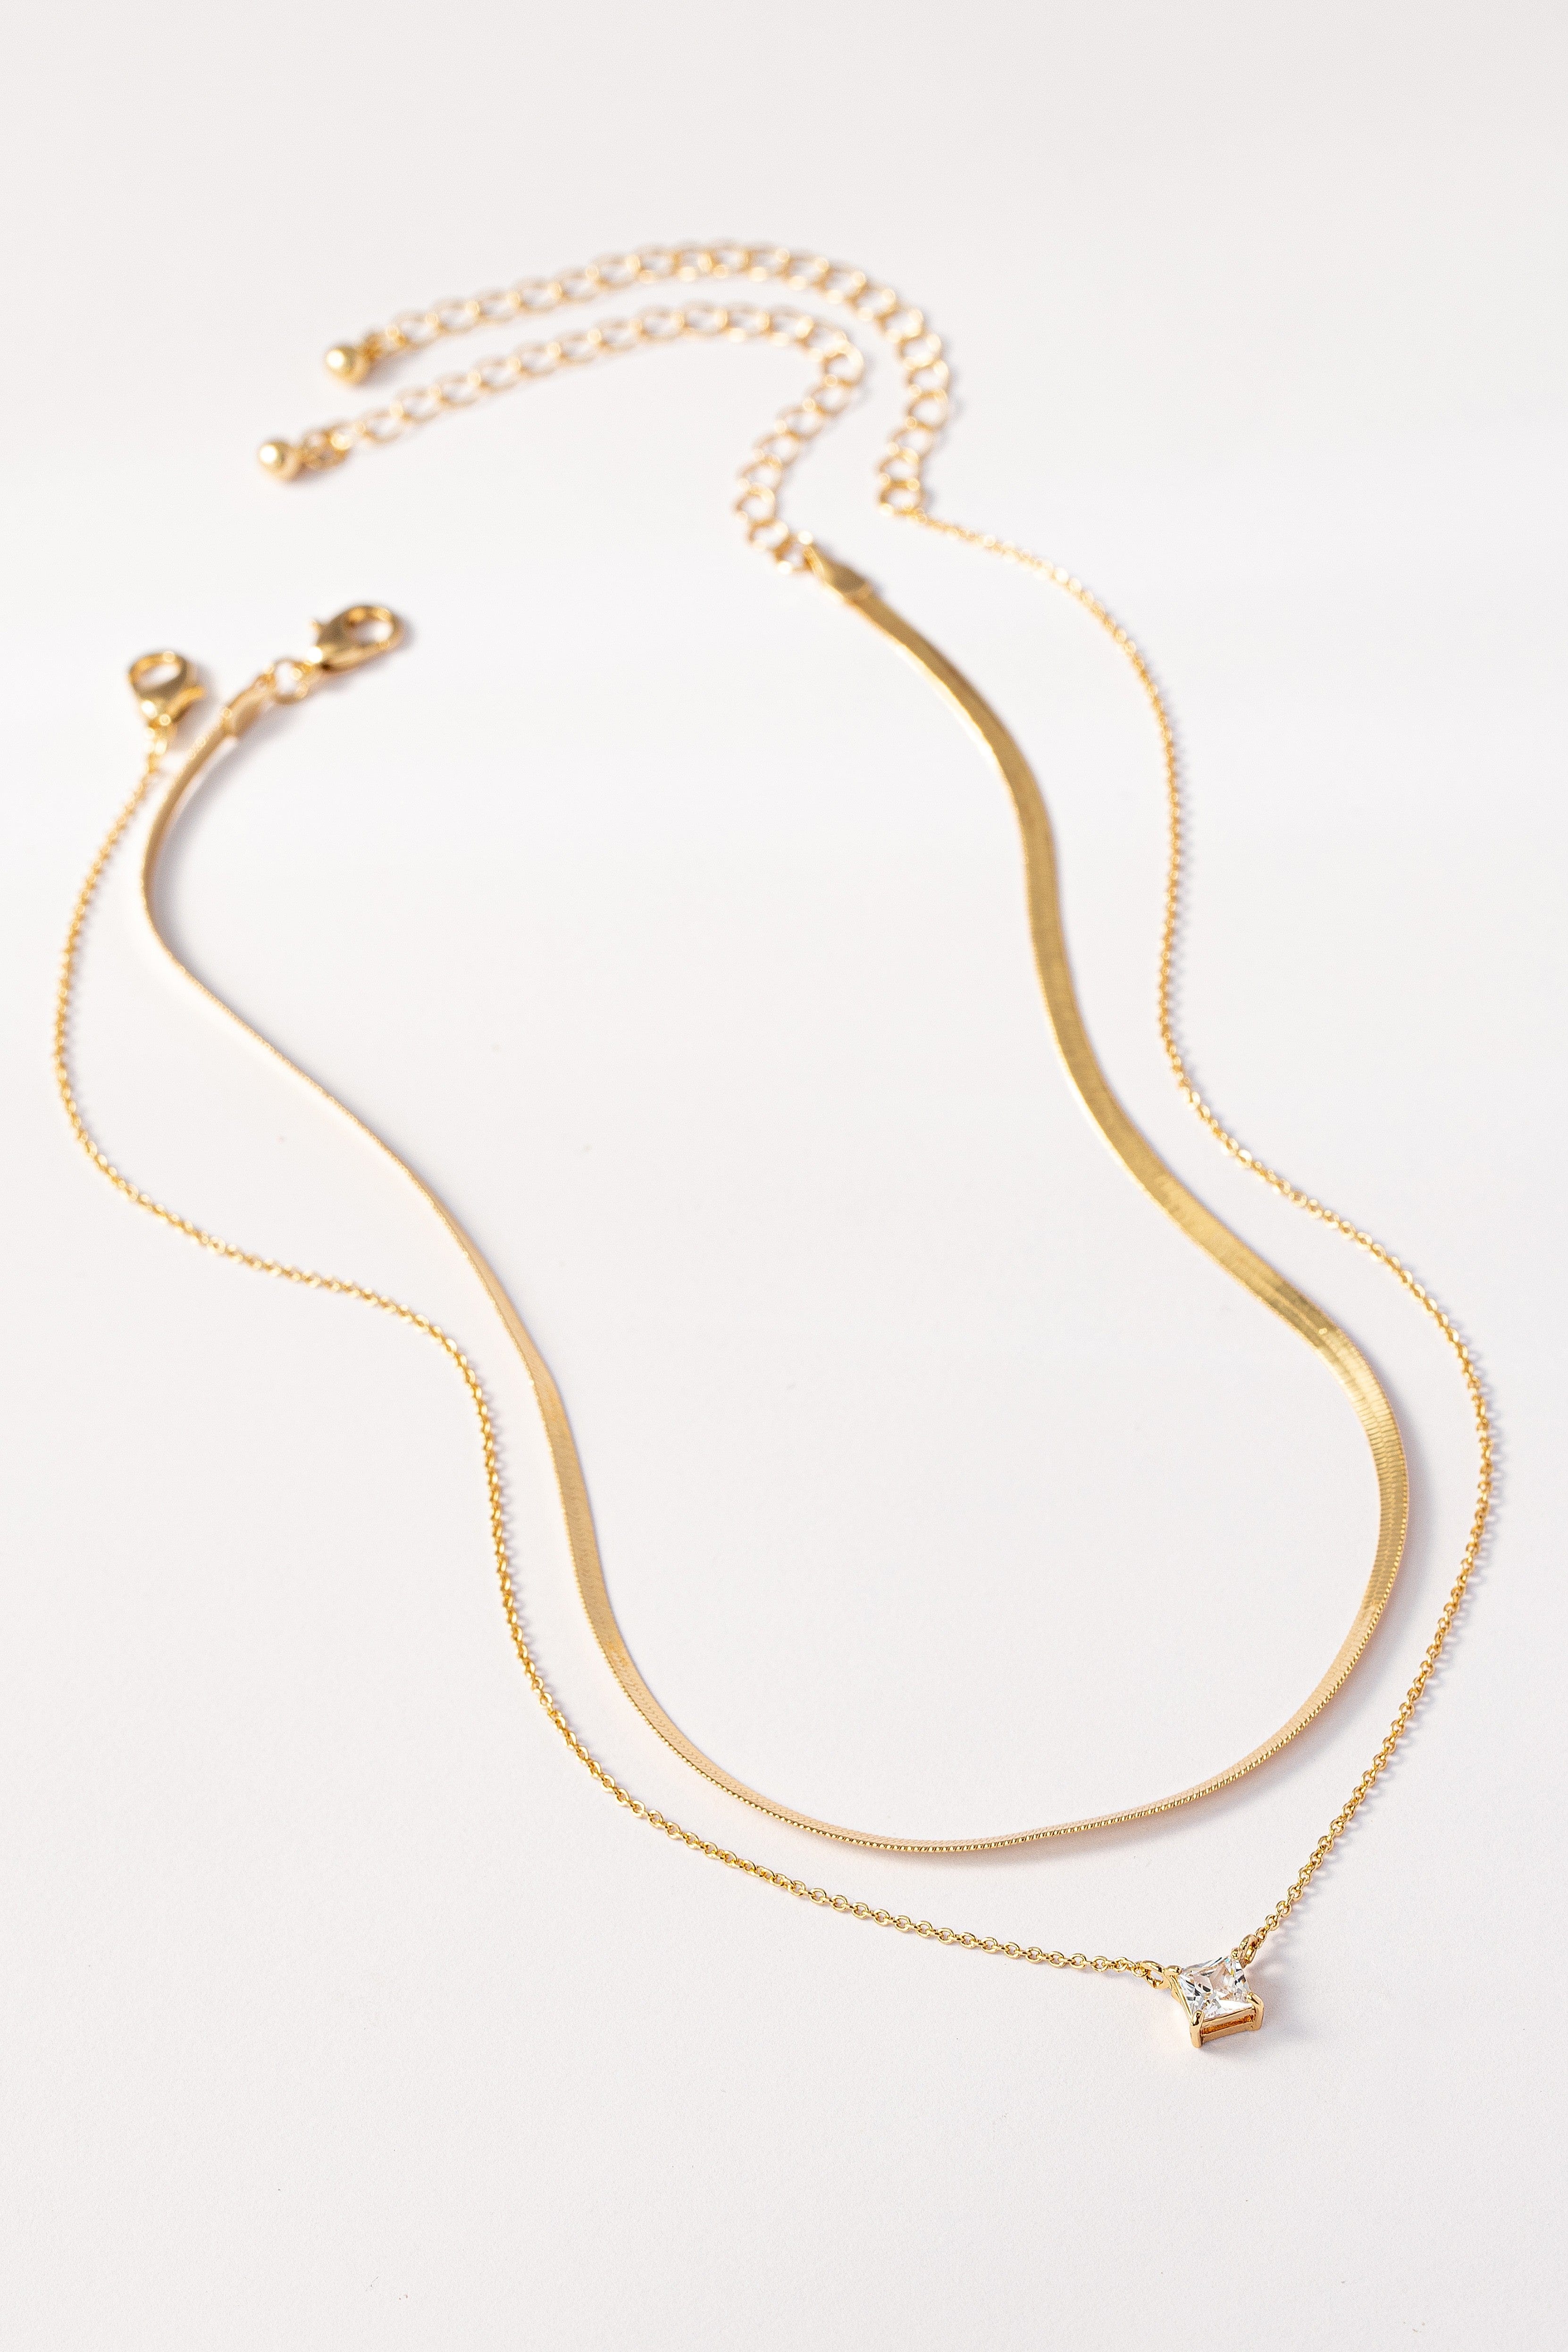 LA3accessories Jewelry - Necklaces Necklace Set With Herringbone And Square CZ Pendant In Gold 07765494